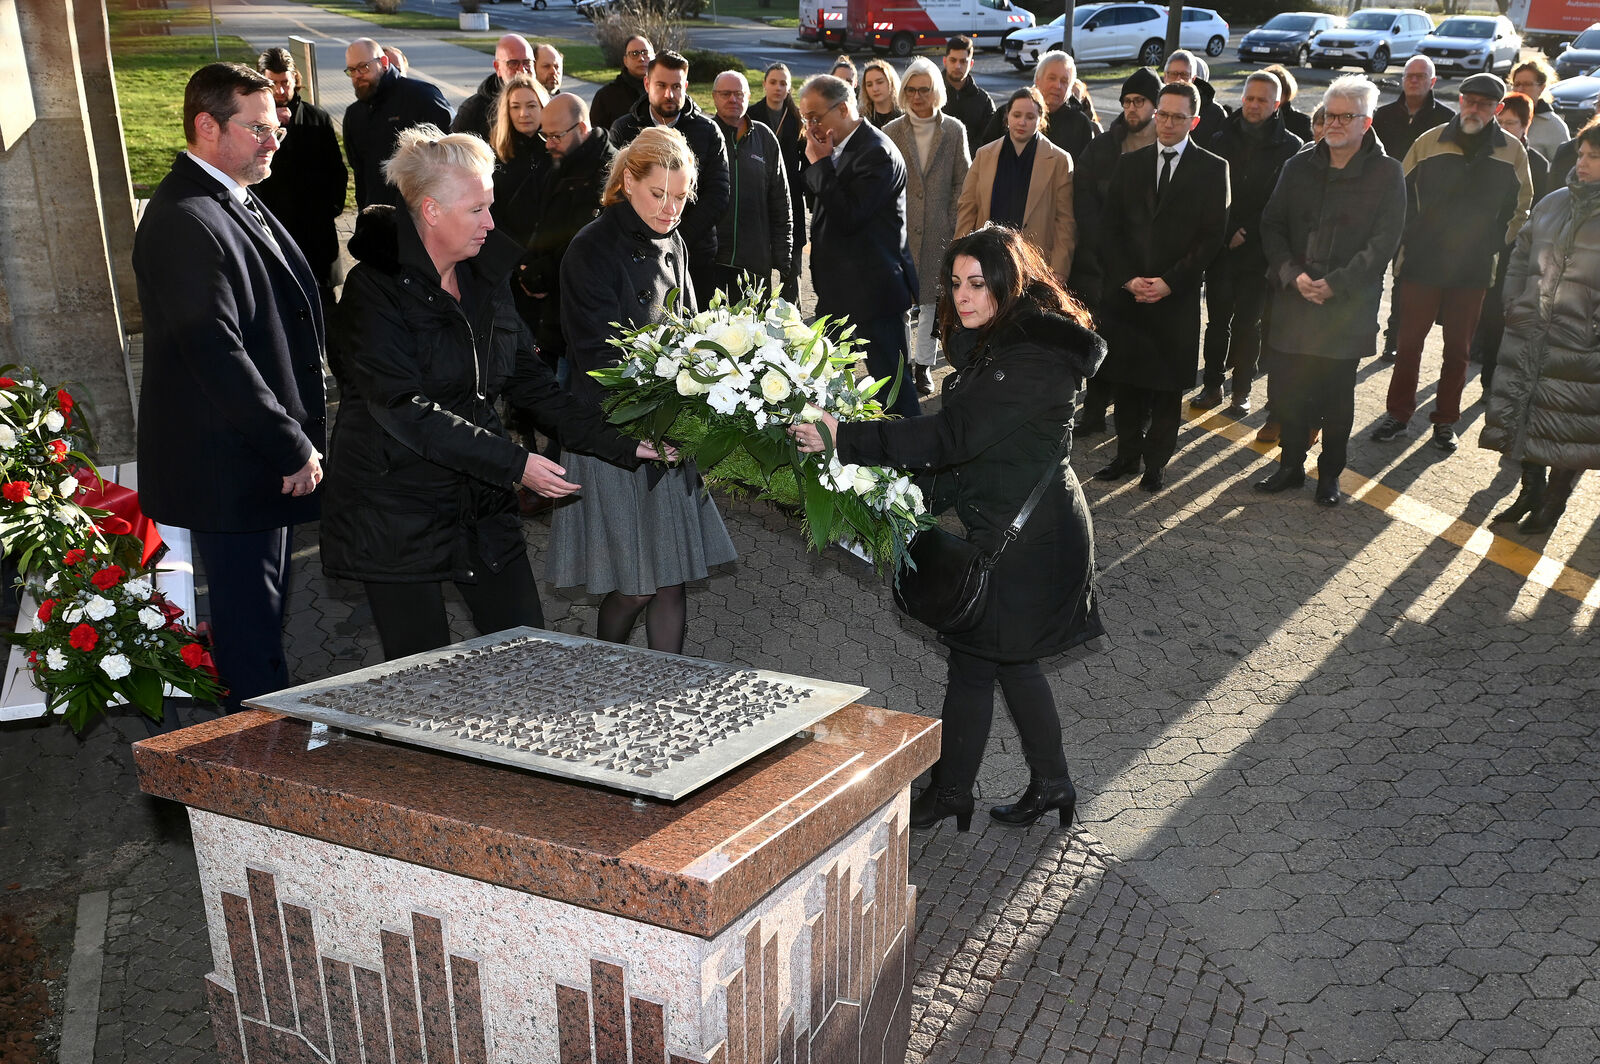 Laying a wreath at the memorial stone at the Wolfsburg plant: from left Nicole Kösling, Kerstin Waltenberg and Daniela Cavallo.